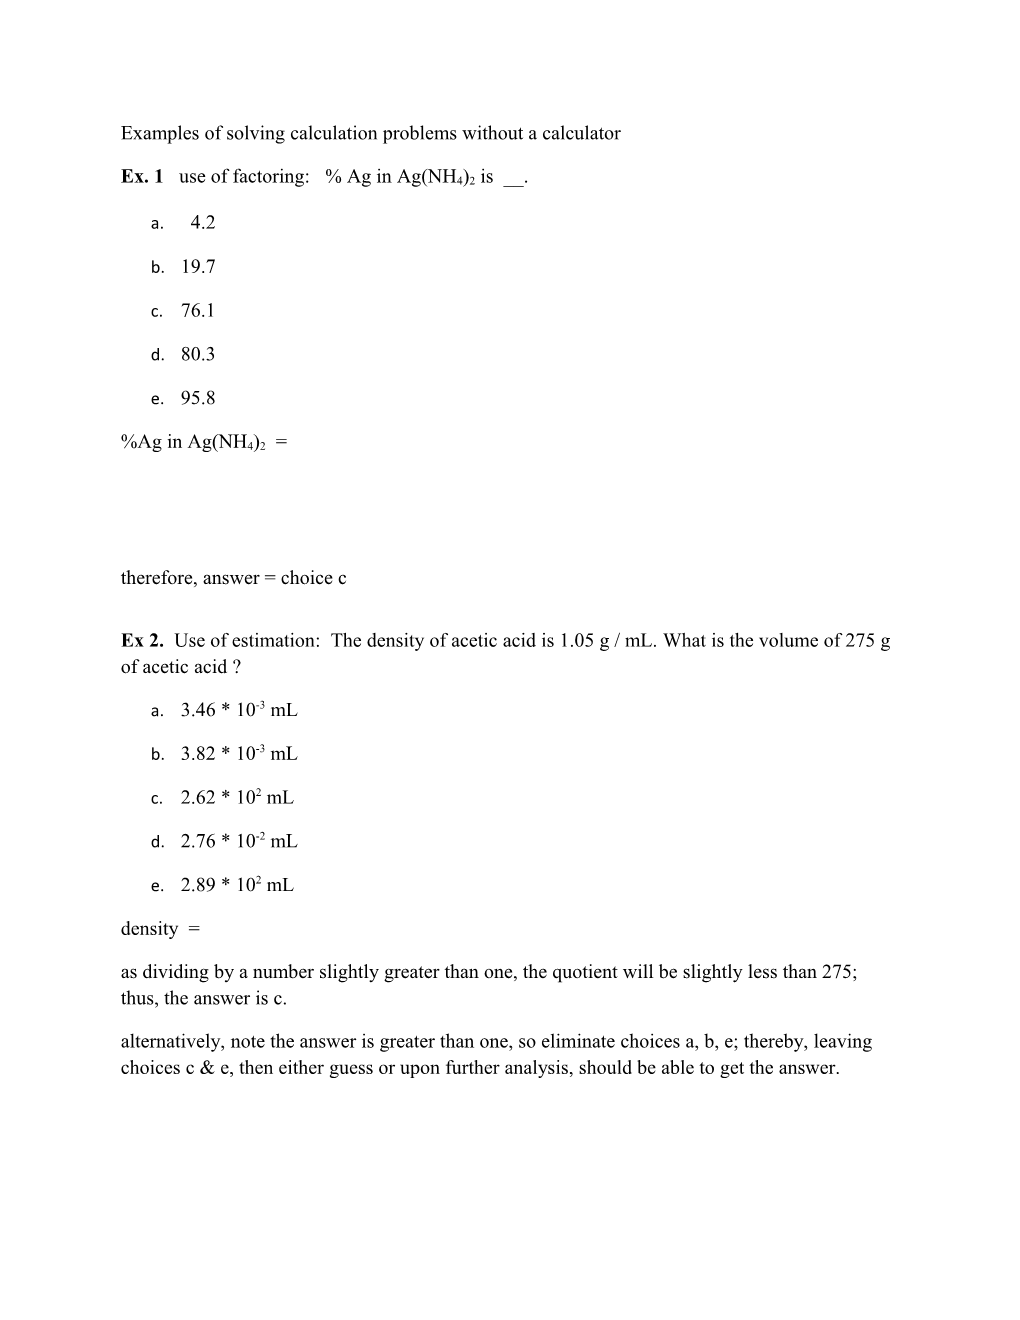 Examples of Solving Calculation Problems Without a Calculator